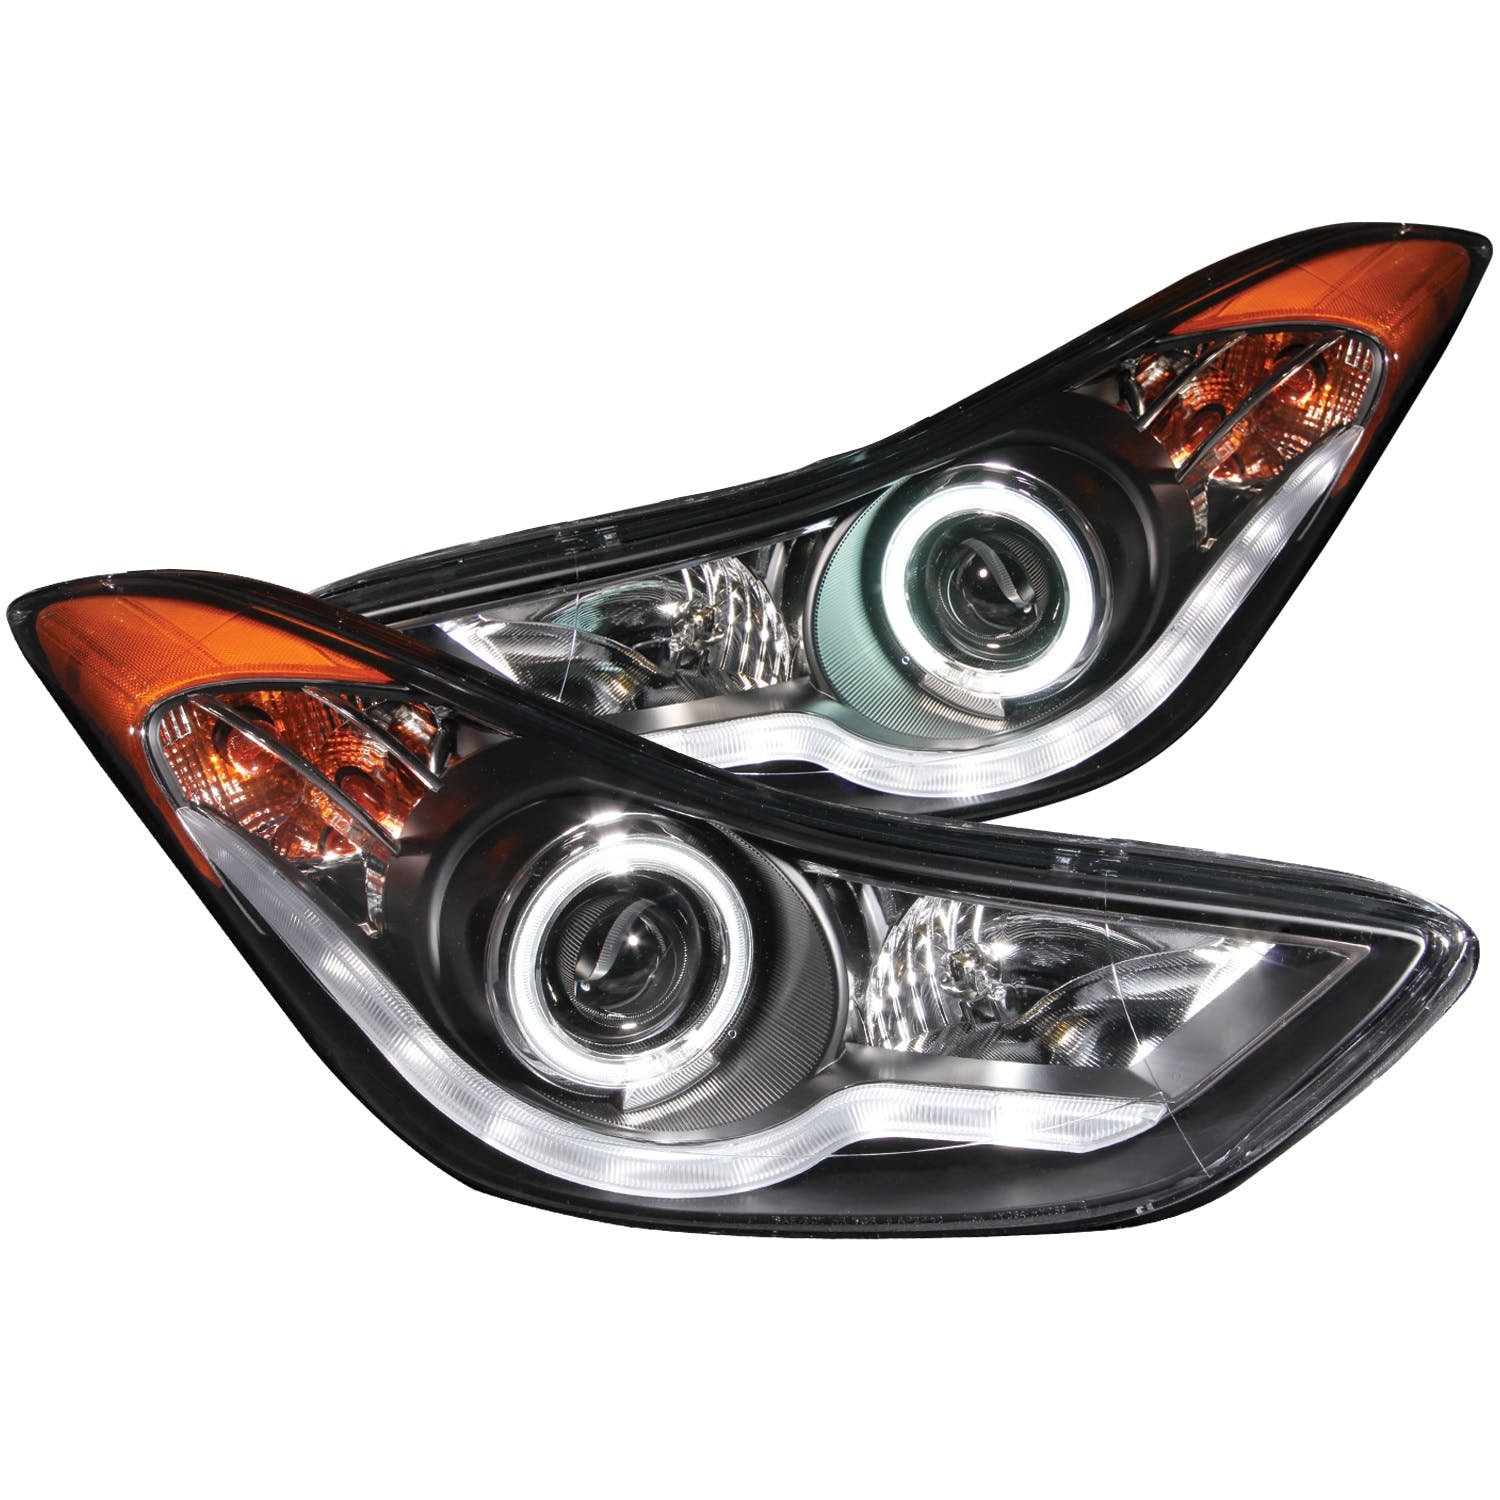 AnzoUSA 121456 Projector Headlights with Halo Black (SMD LED)